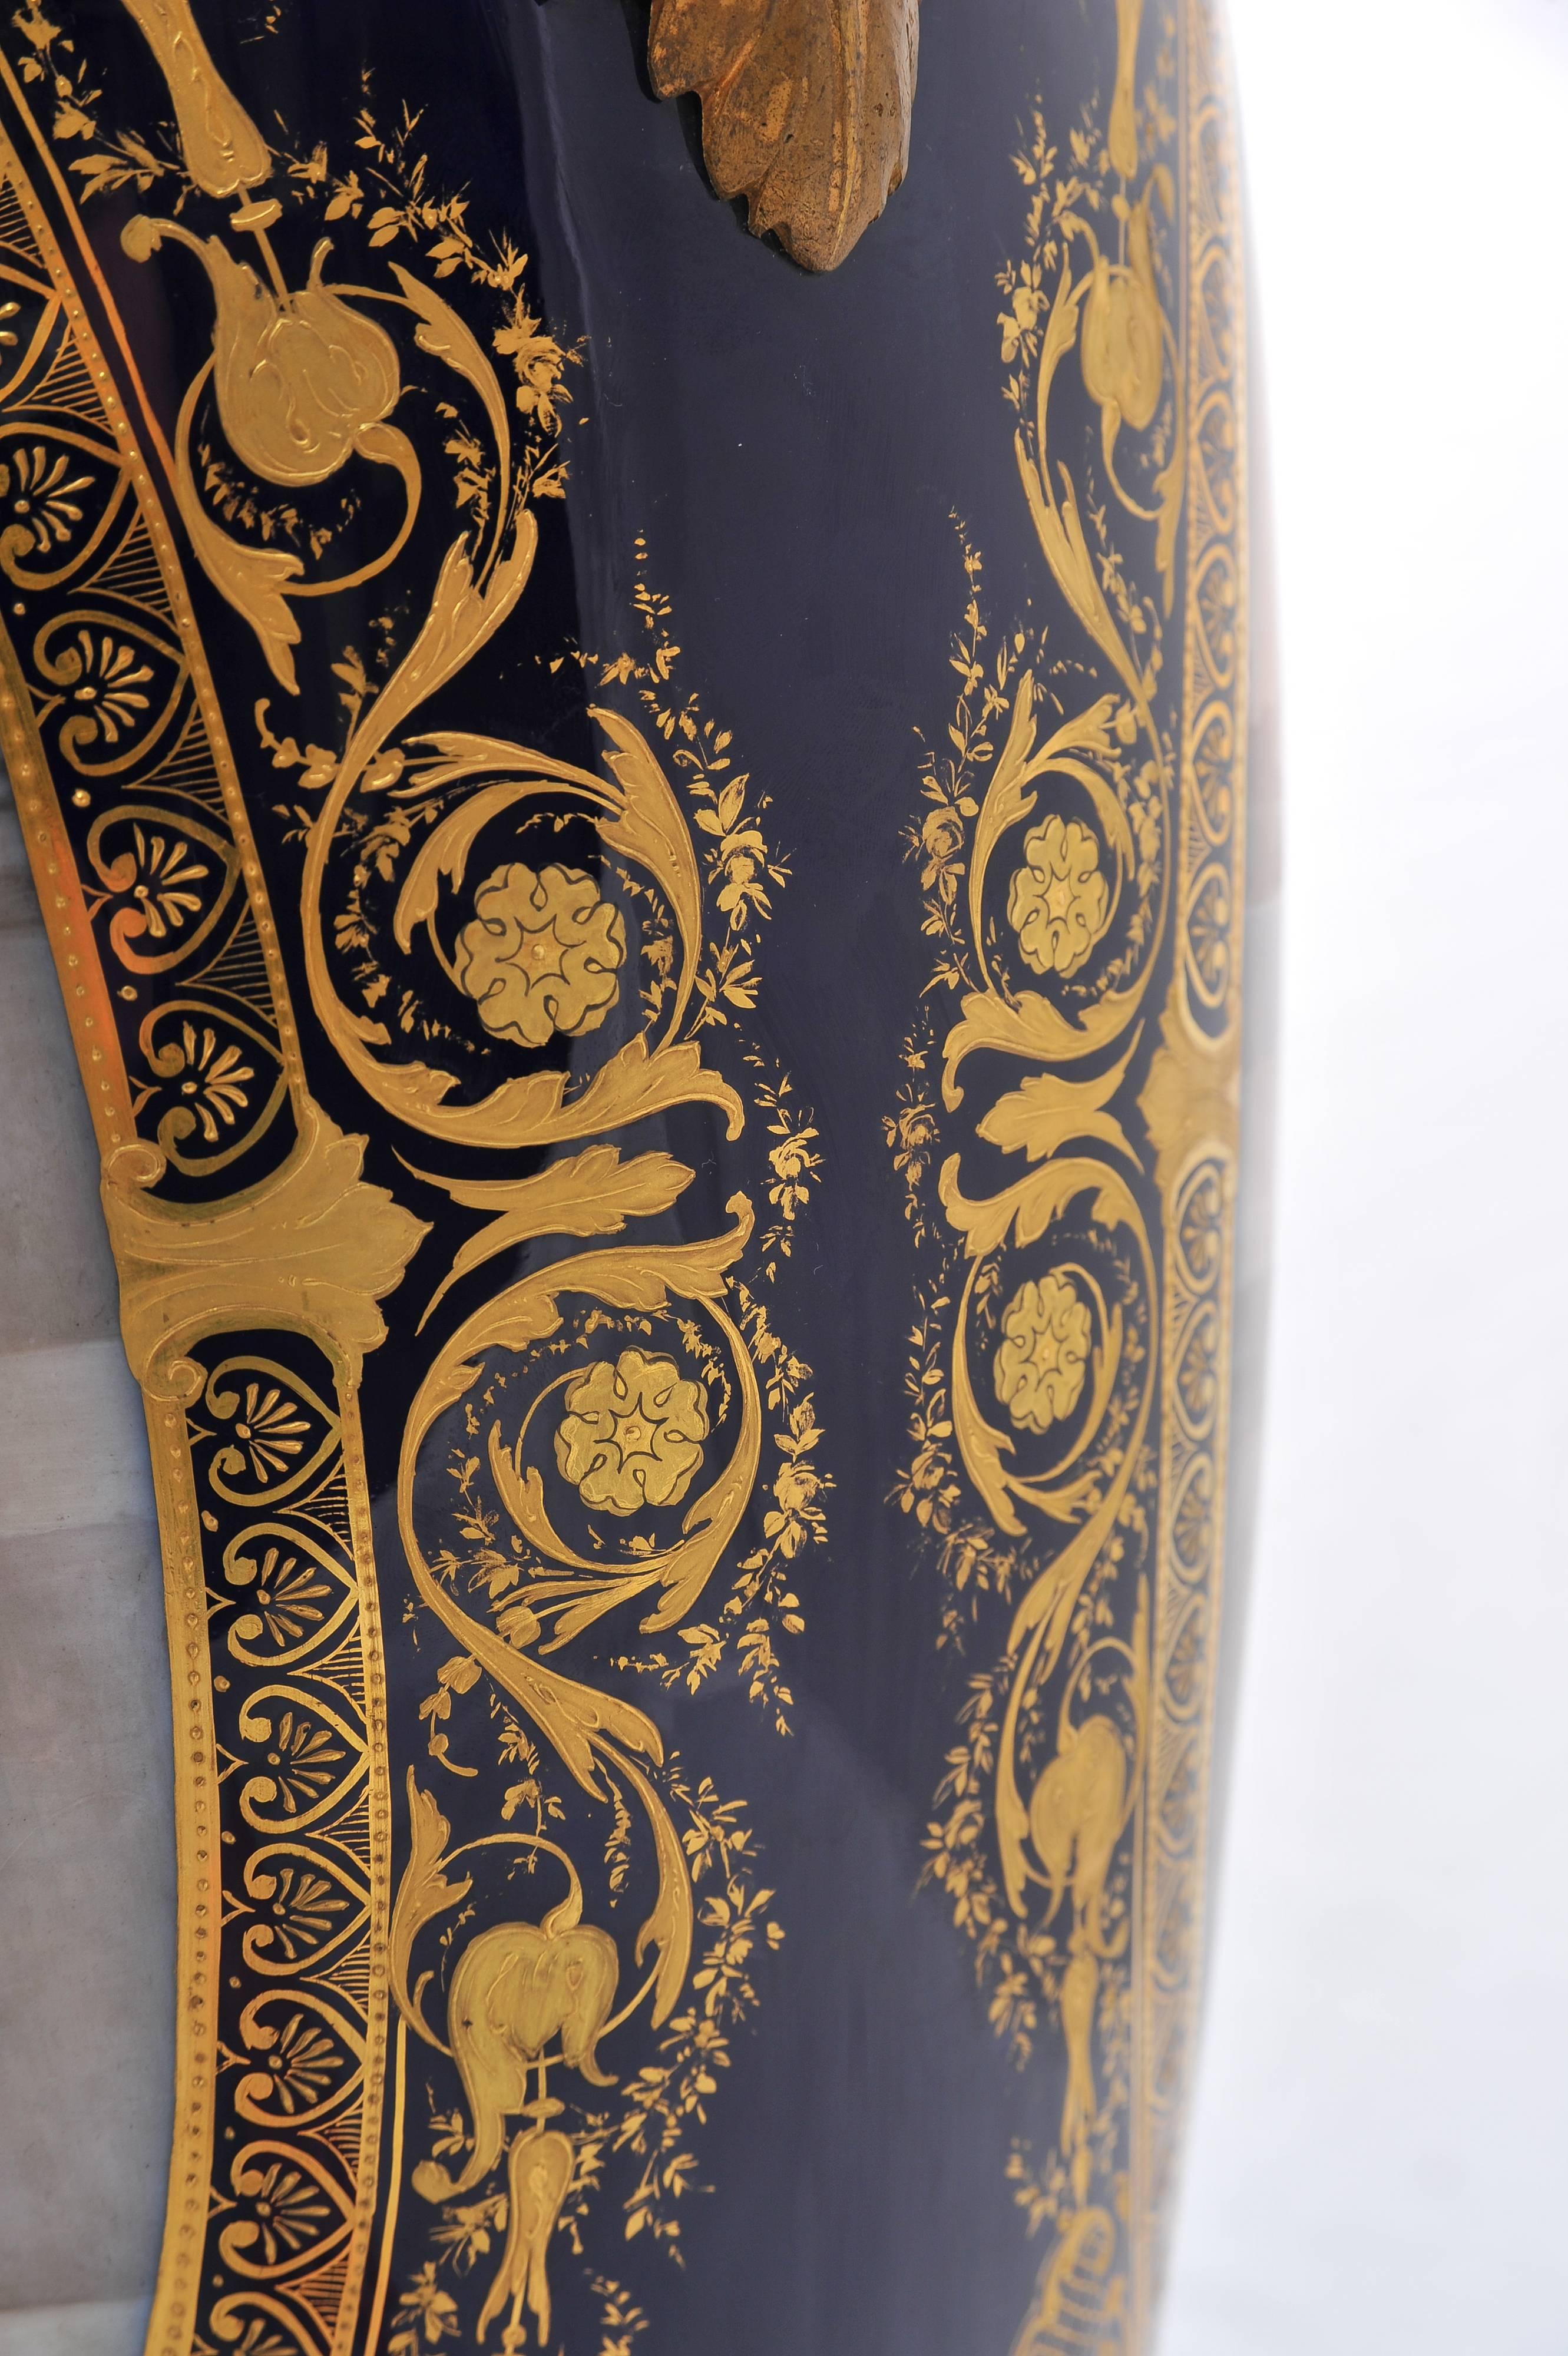 Large 19th Century Sevres Vase In Excellent Condition For Sale In Brighton, Sussex